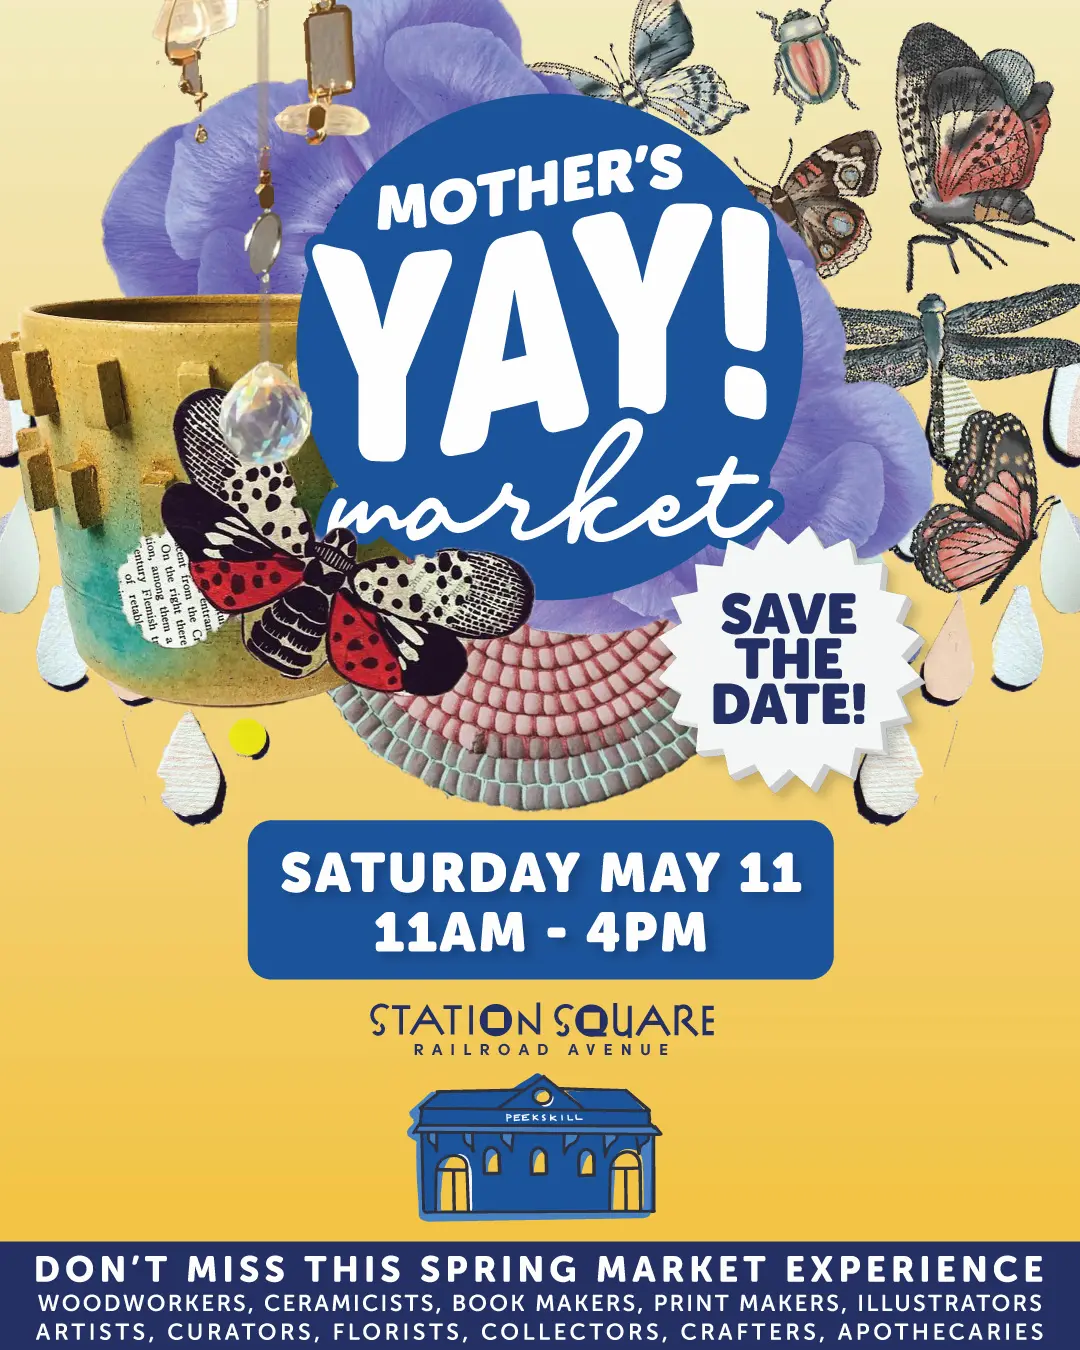 Flier for the 2024 Peekskill Mother's YAY! Market, May 11 at Peekskill's Station Square